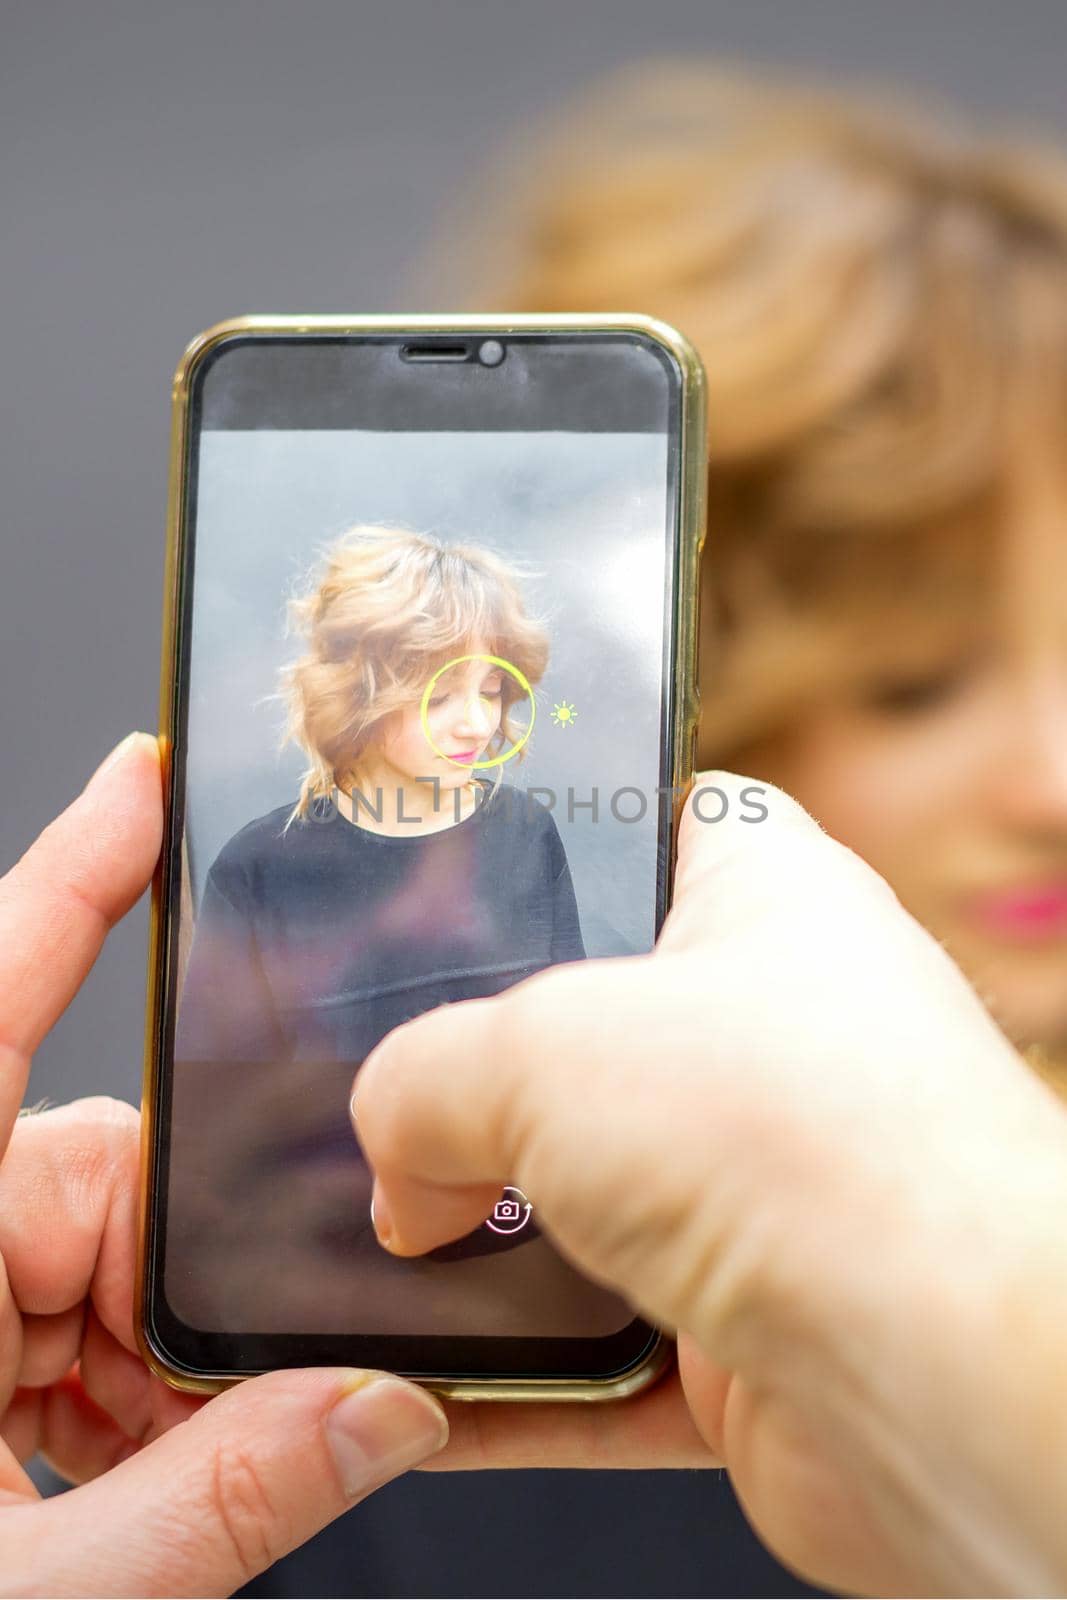 Man hairdresser taking pictures on the smartphone of her client's hairstyle against a gray background